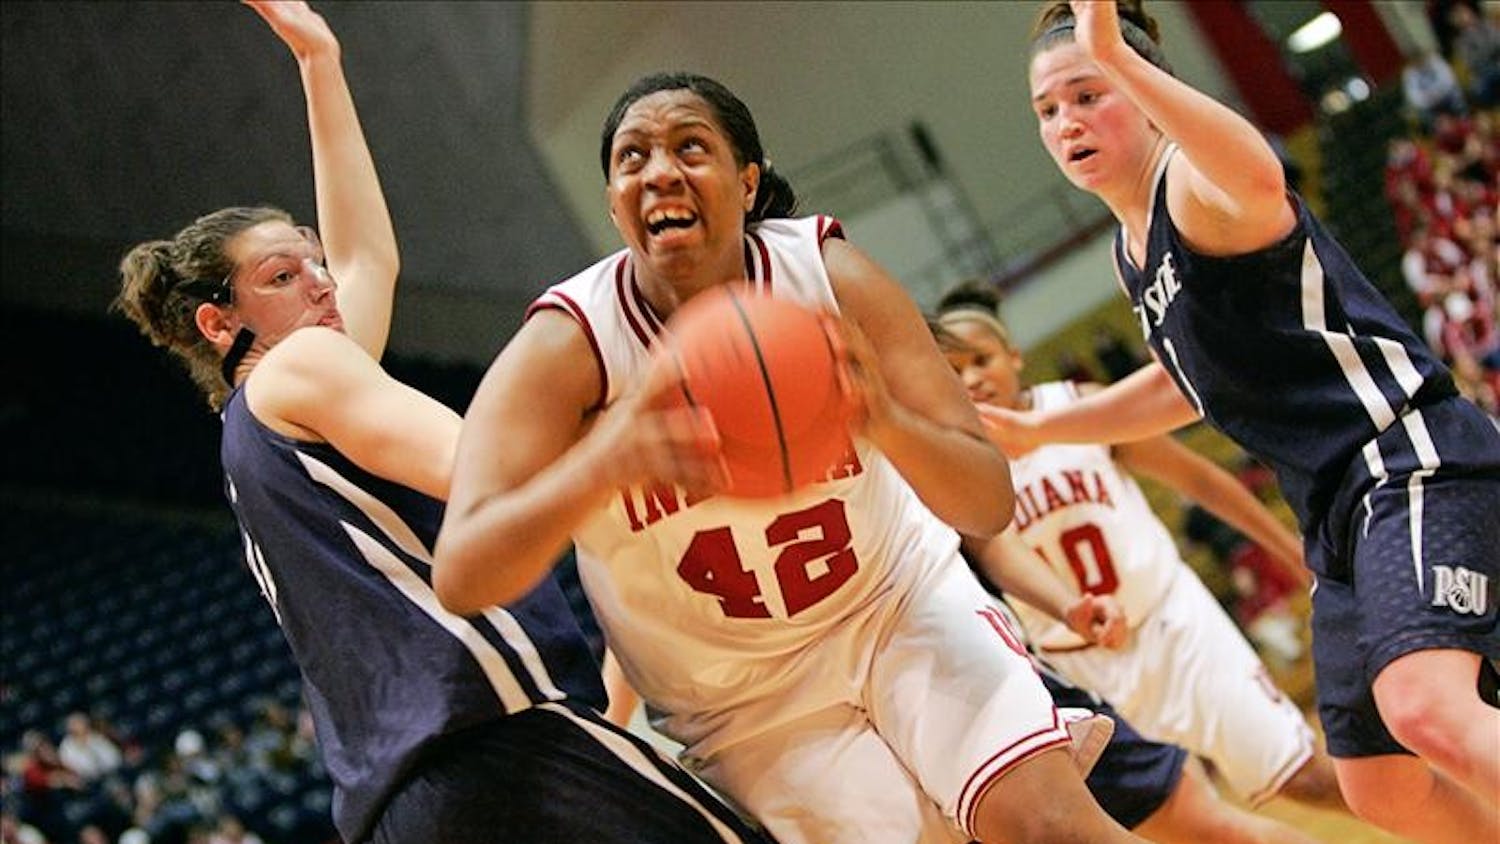 Senior forward Amber Jackson powers through two defenders during the Hoosiers 65-55 win over Penn State Thursday night at Assembly Hall.